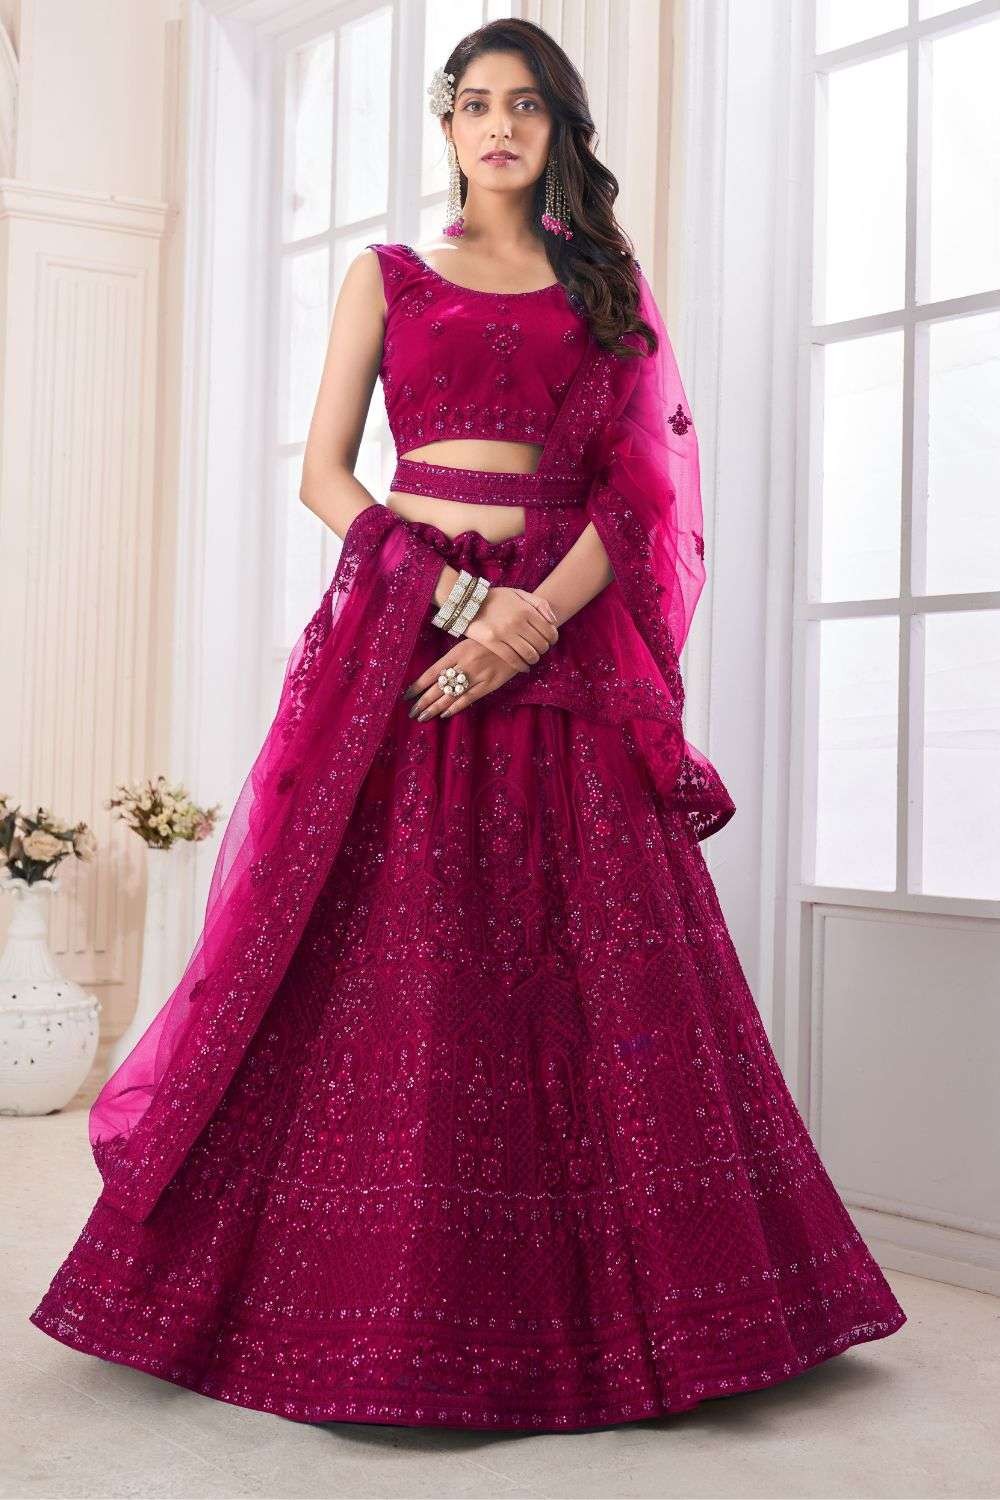 Buy Aurora Red Floral and Paisley Patterned Bridal Lehenga Online in India  @Mohey - Lehenga for Women